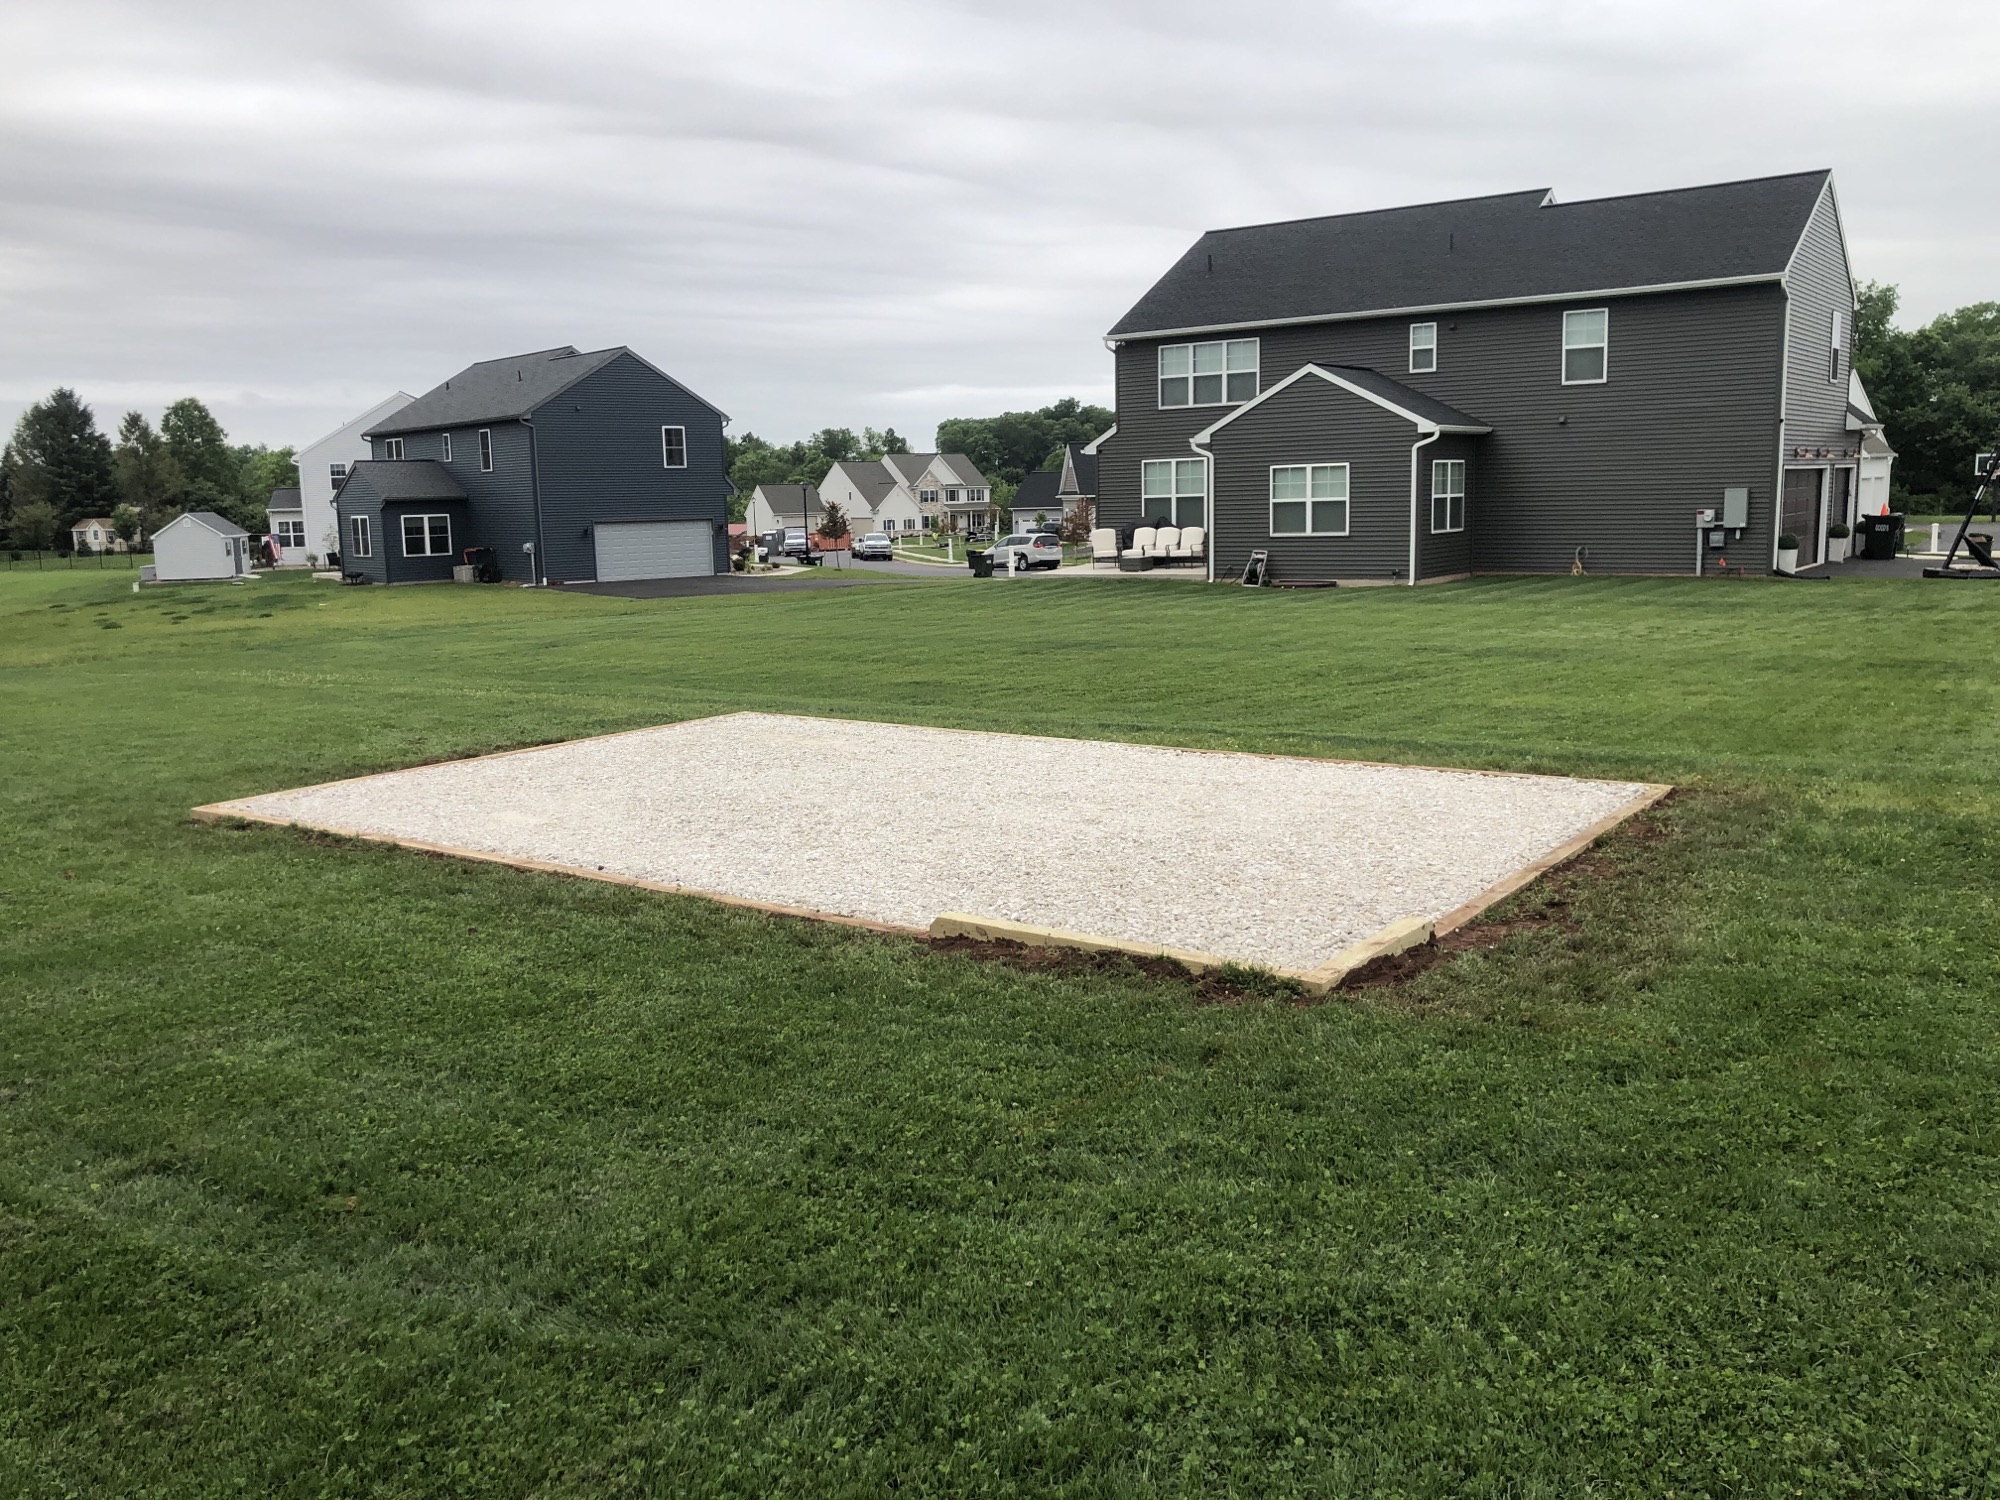 14x22 gravel shed pad for 12x20 shed